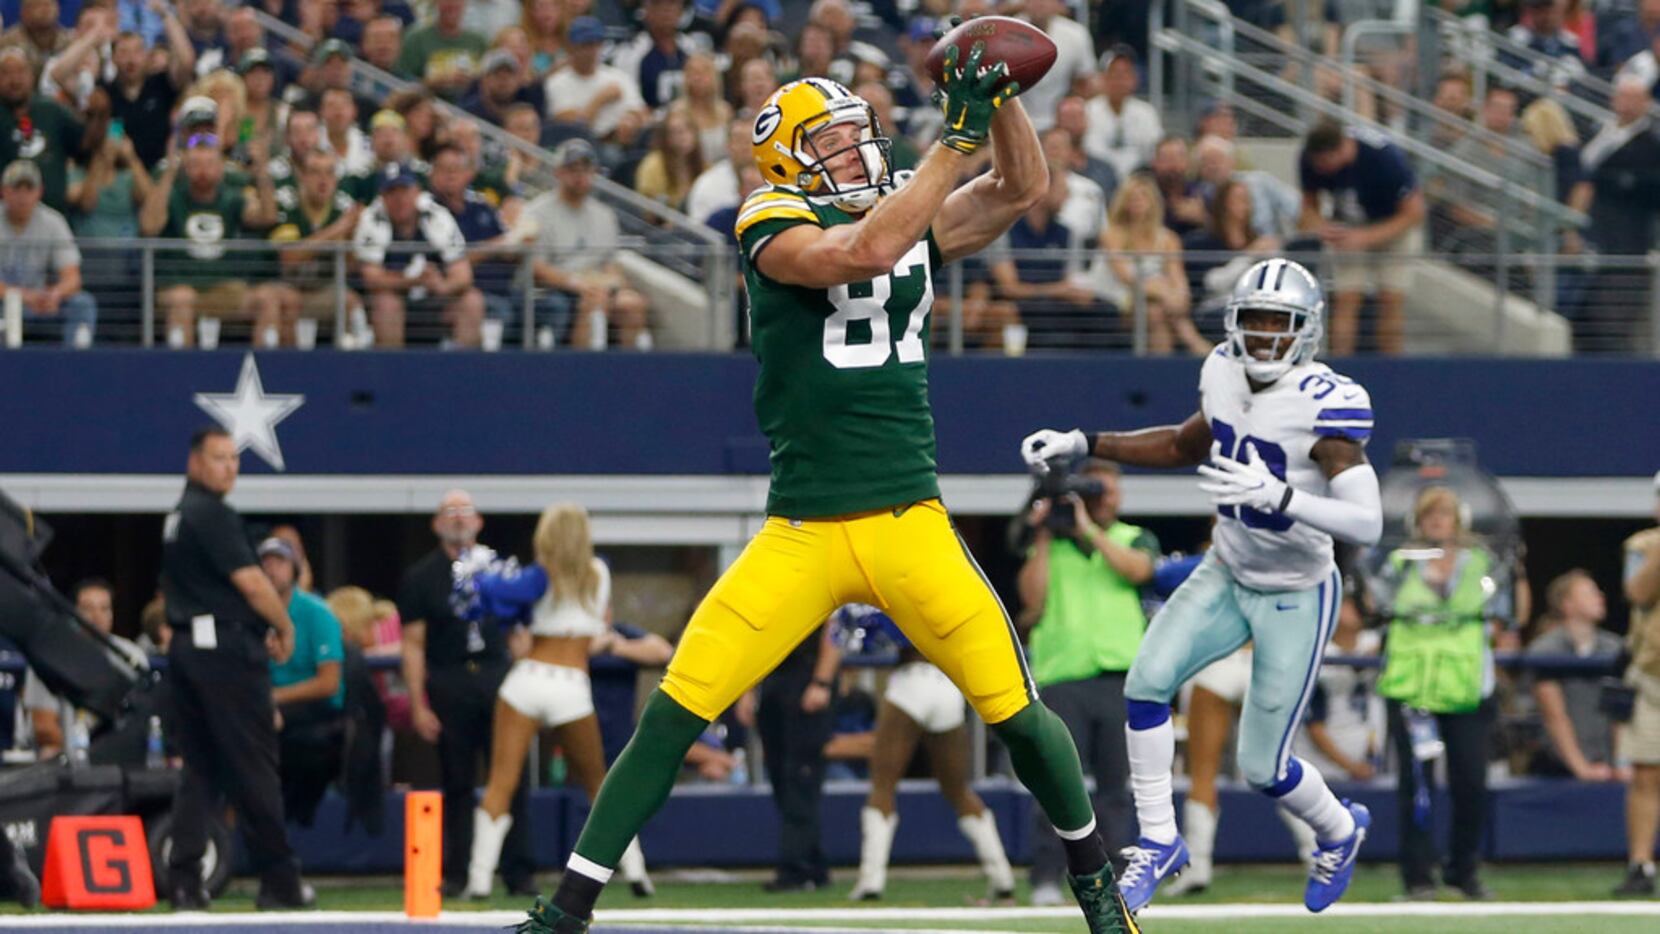 Should the Cowboys pursue former Green Bay Packers star Jordy